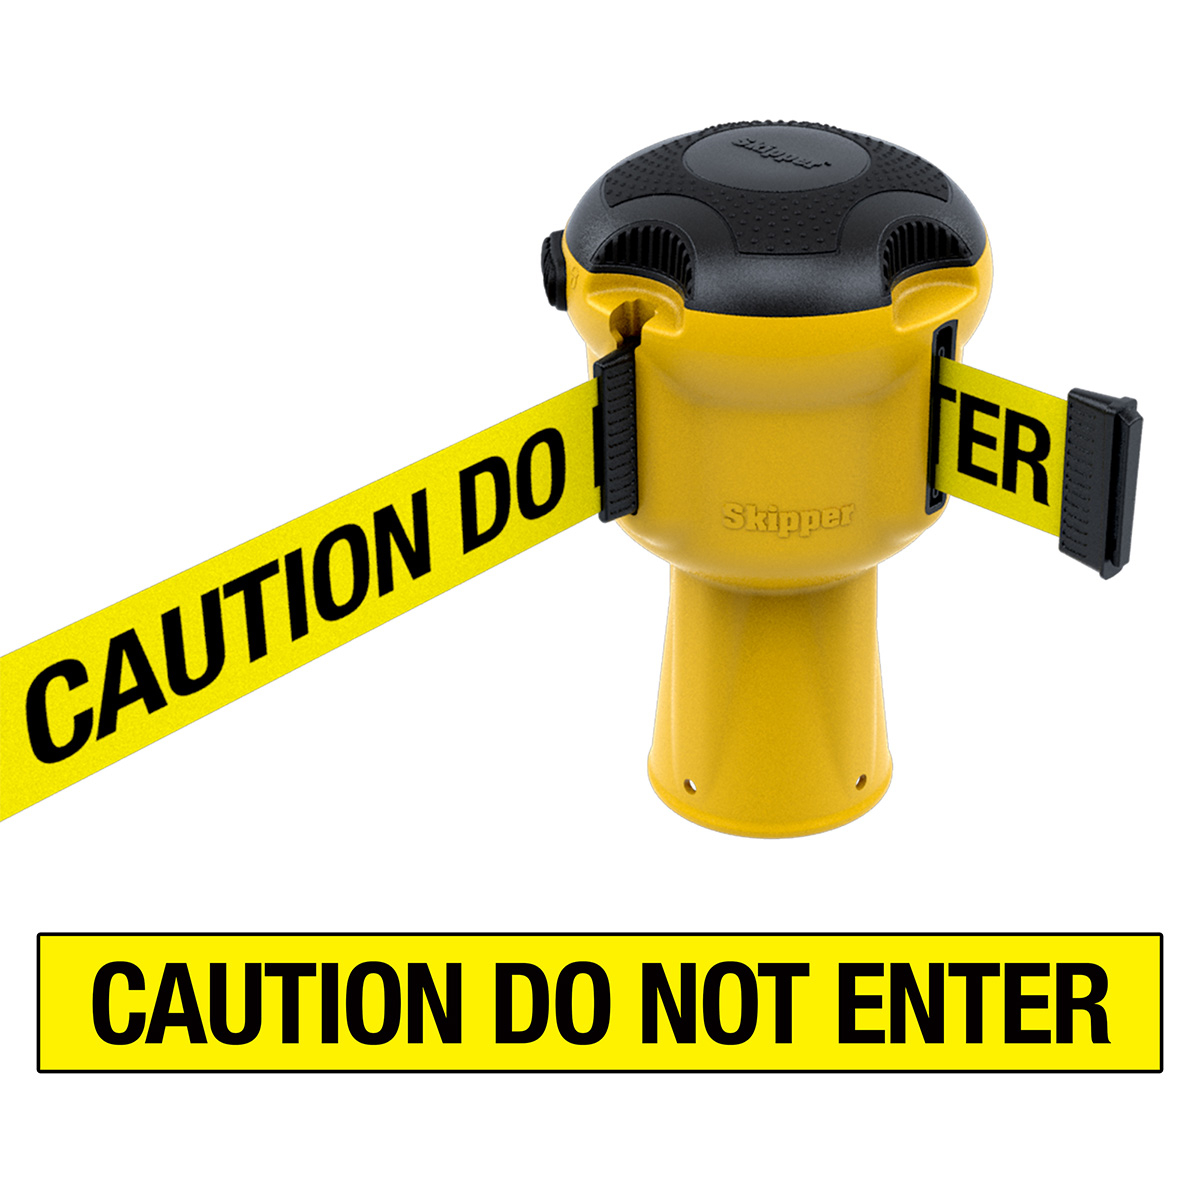 Skipper™ Retractable Safety Barrier in Yellow With CAUTION DO NOT ENETR Warning Tape